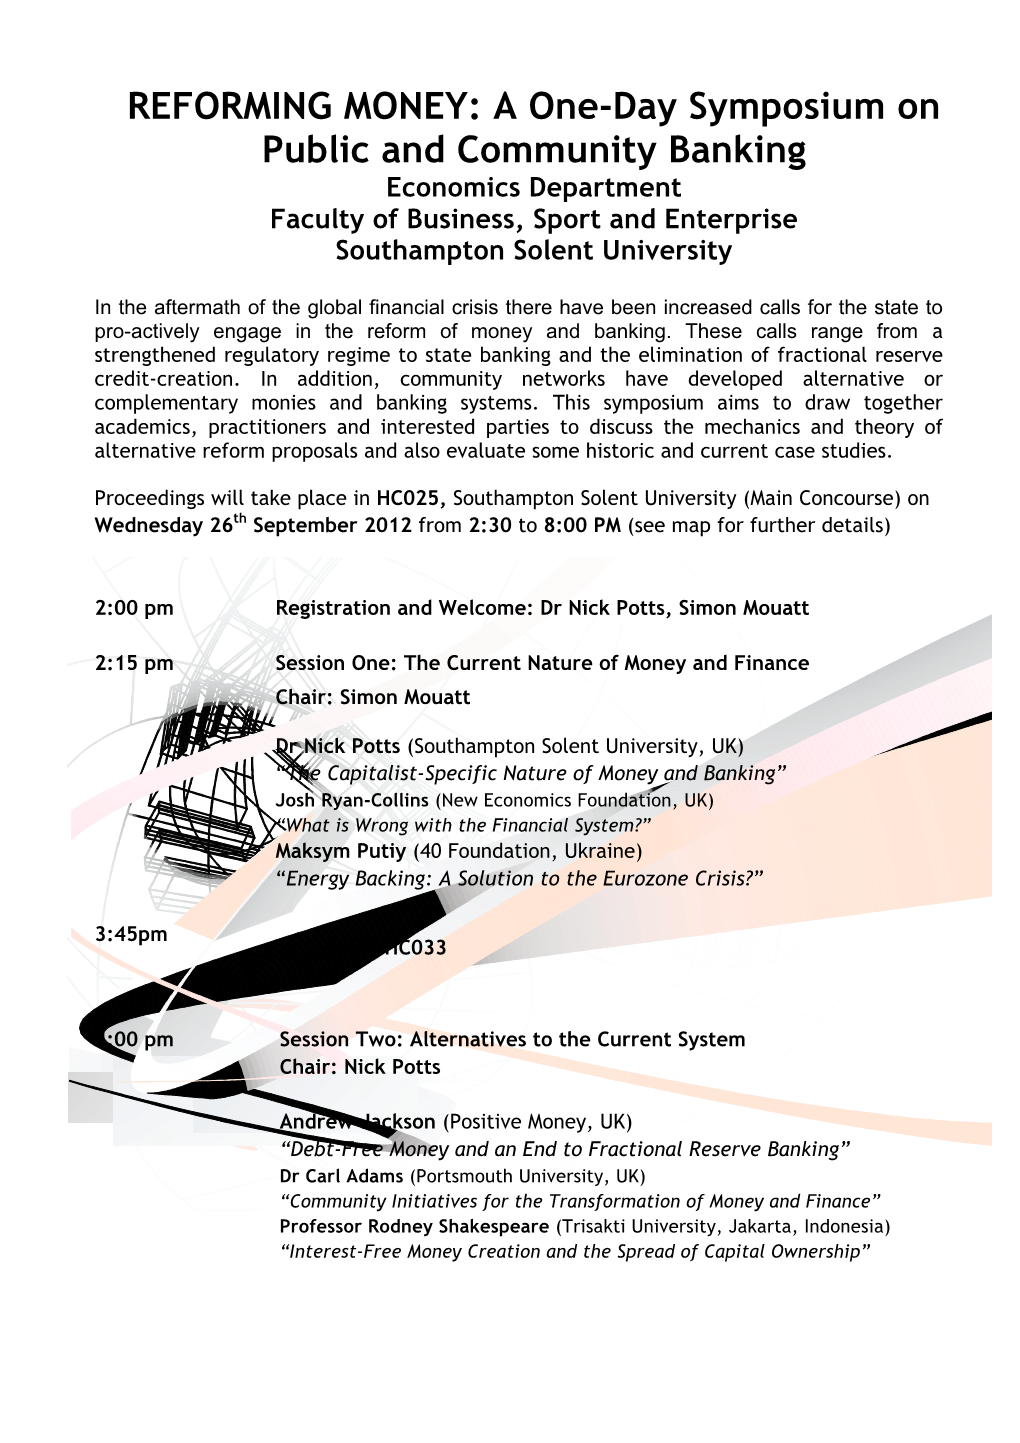 REFORMING MONEY: a One-Day Symposium on Public and Community Banking Economics Department Faculty of Business, Sport and Enterprise Southampton Solent University